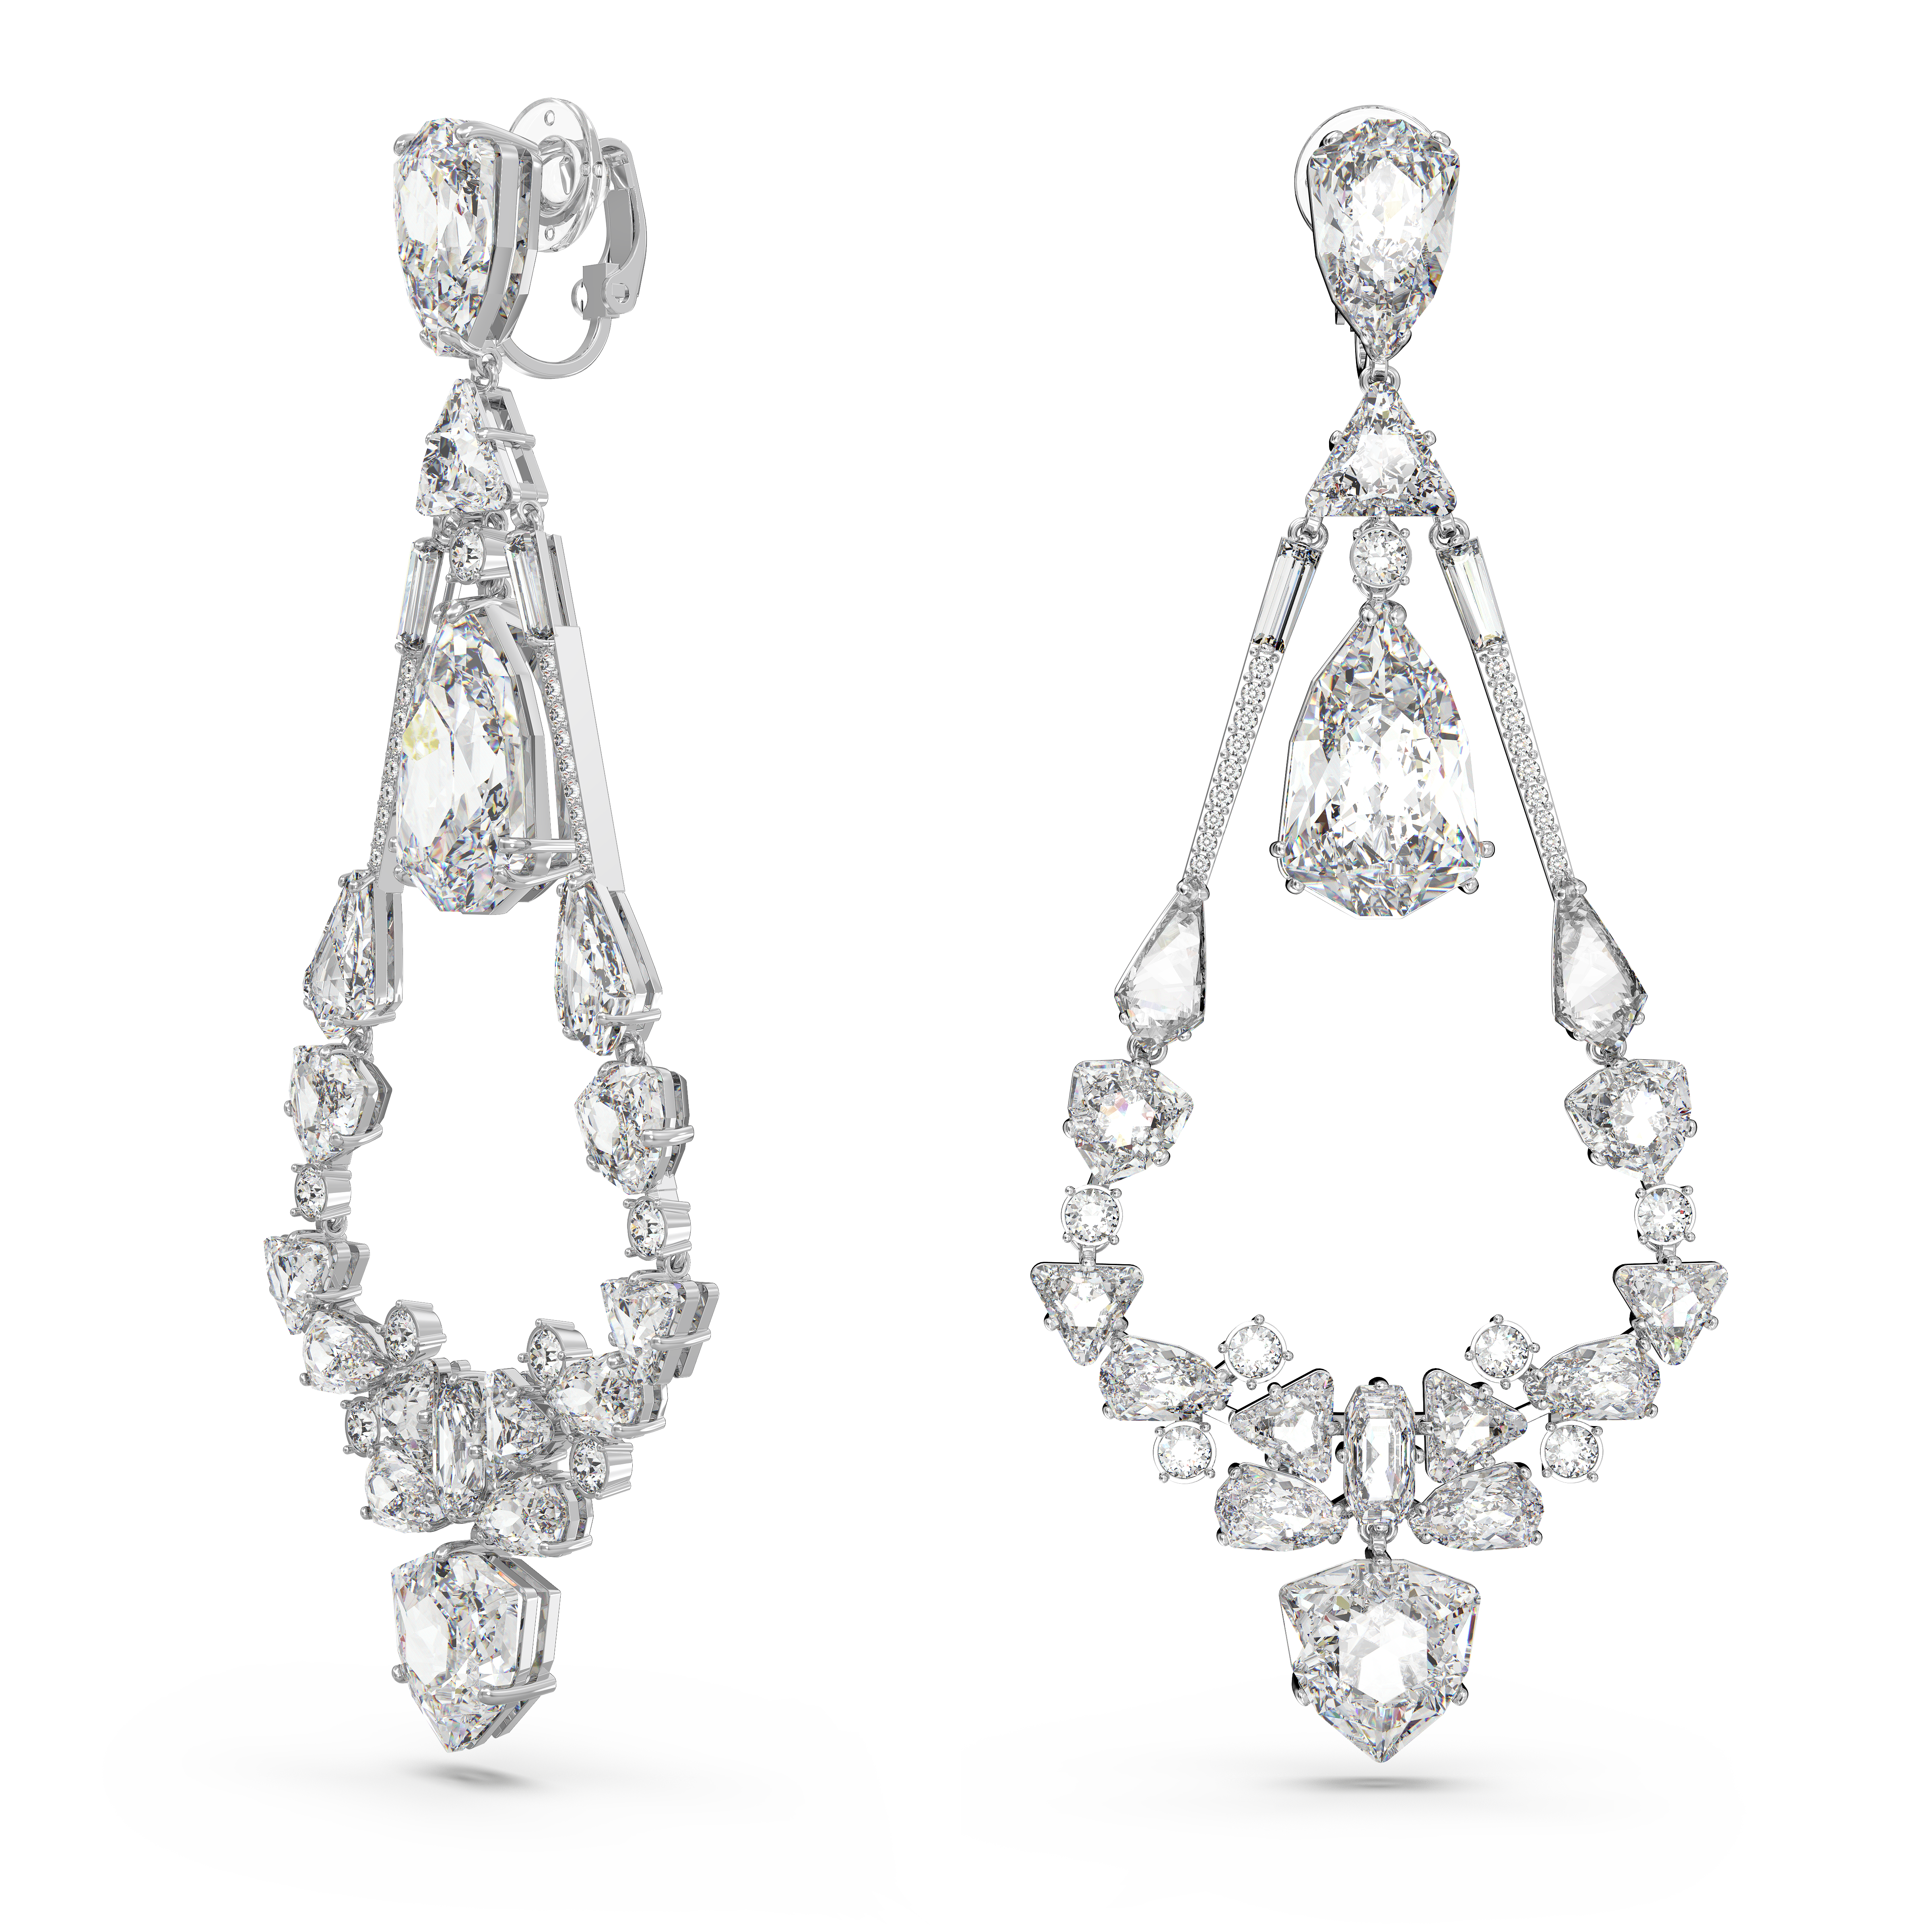 SWAROVSKI MESMERA CLIP EARRINGS, MIXED CUTS, CHANDELIER, LONG, WHITE, RHODIUM PLATED 5665827